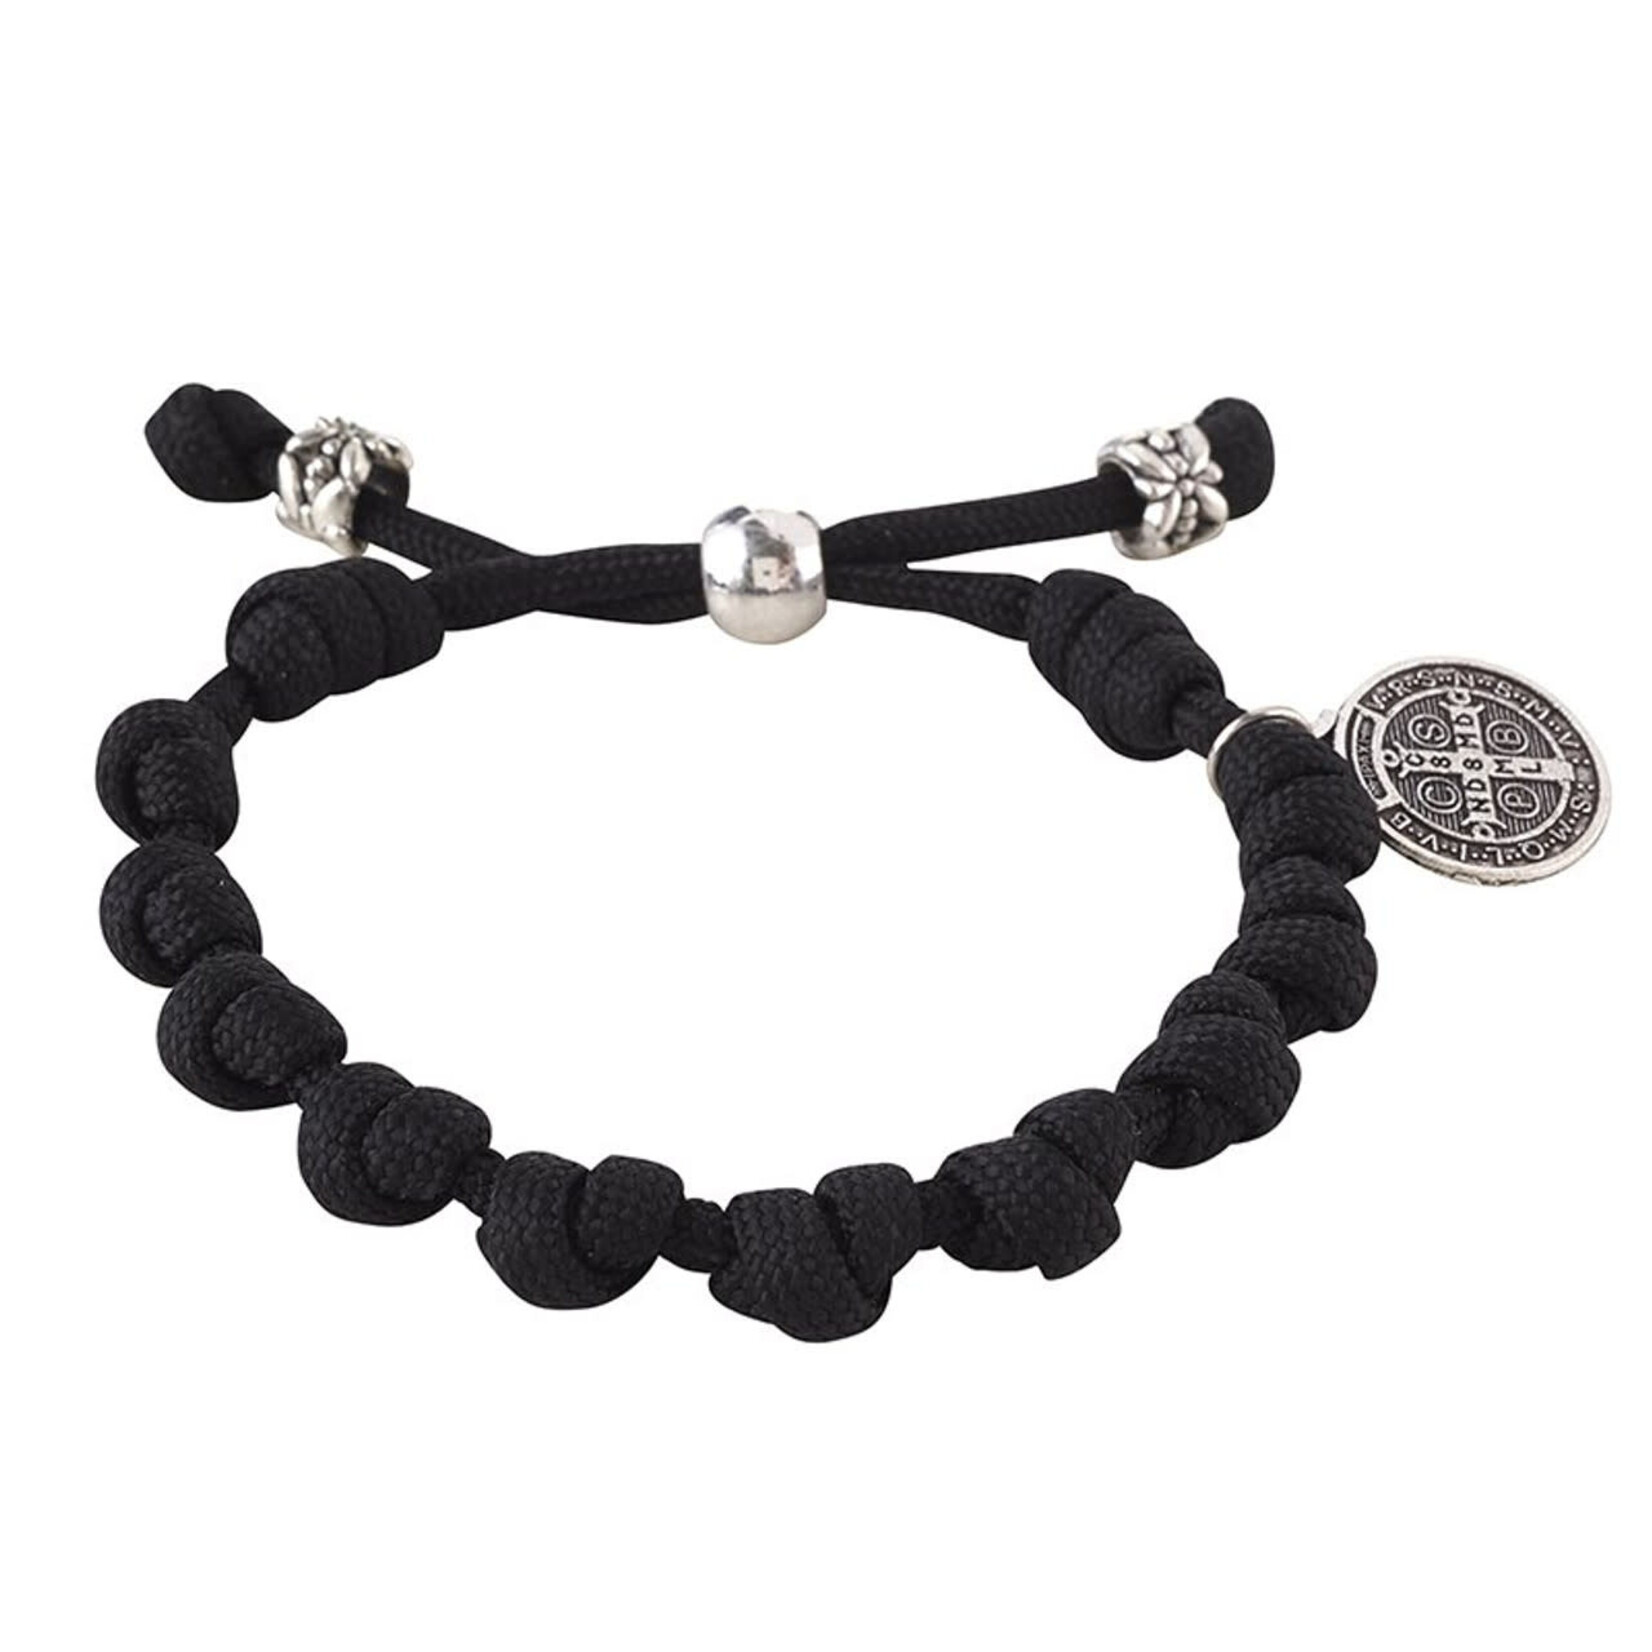 Black Paracord Rosary Bracelet with St Benedict Medal